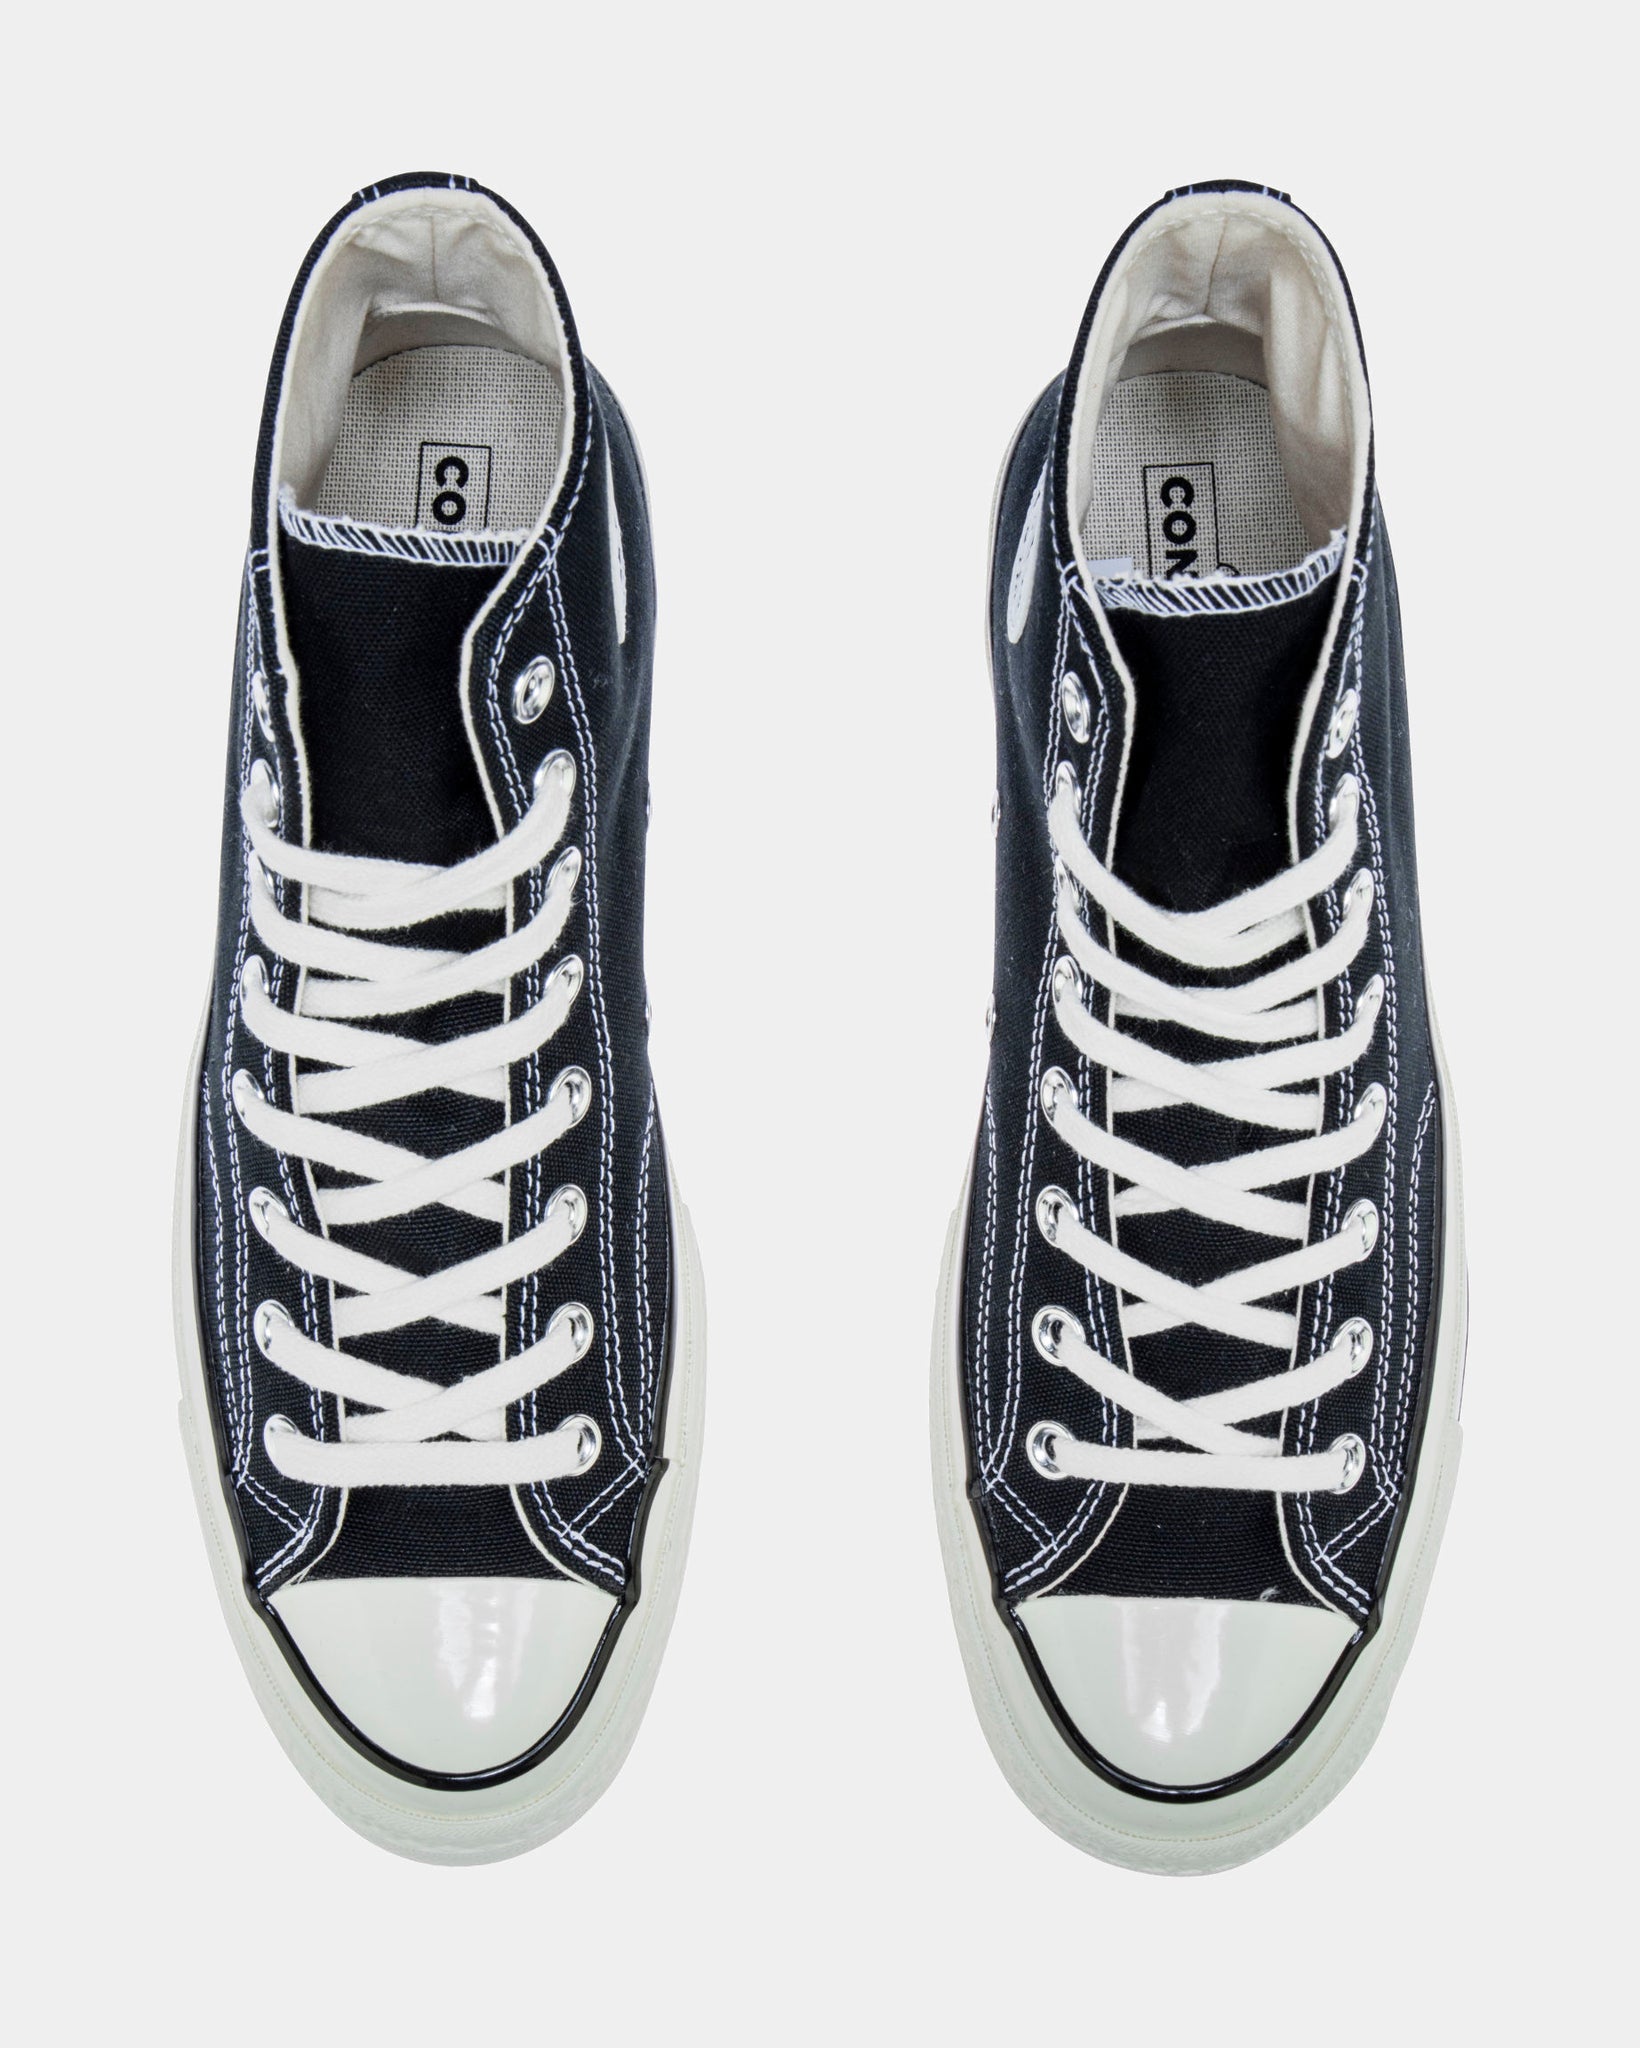 Men's Chuck Taylor All Star: Low & High Top.